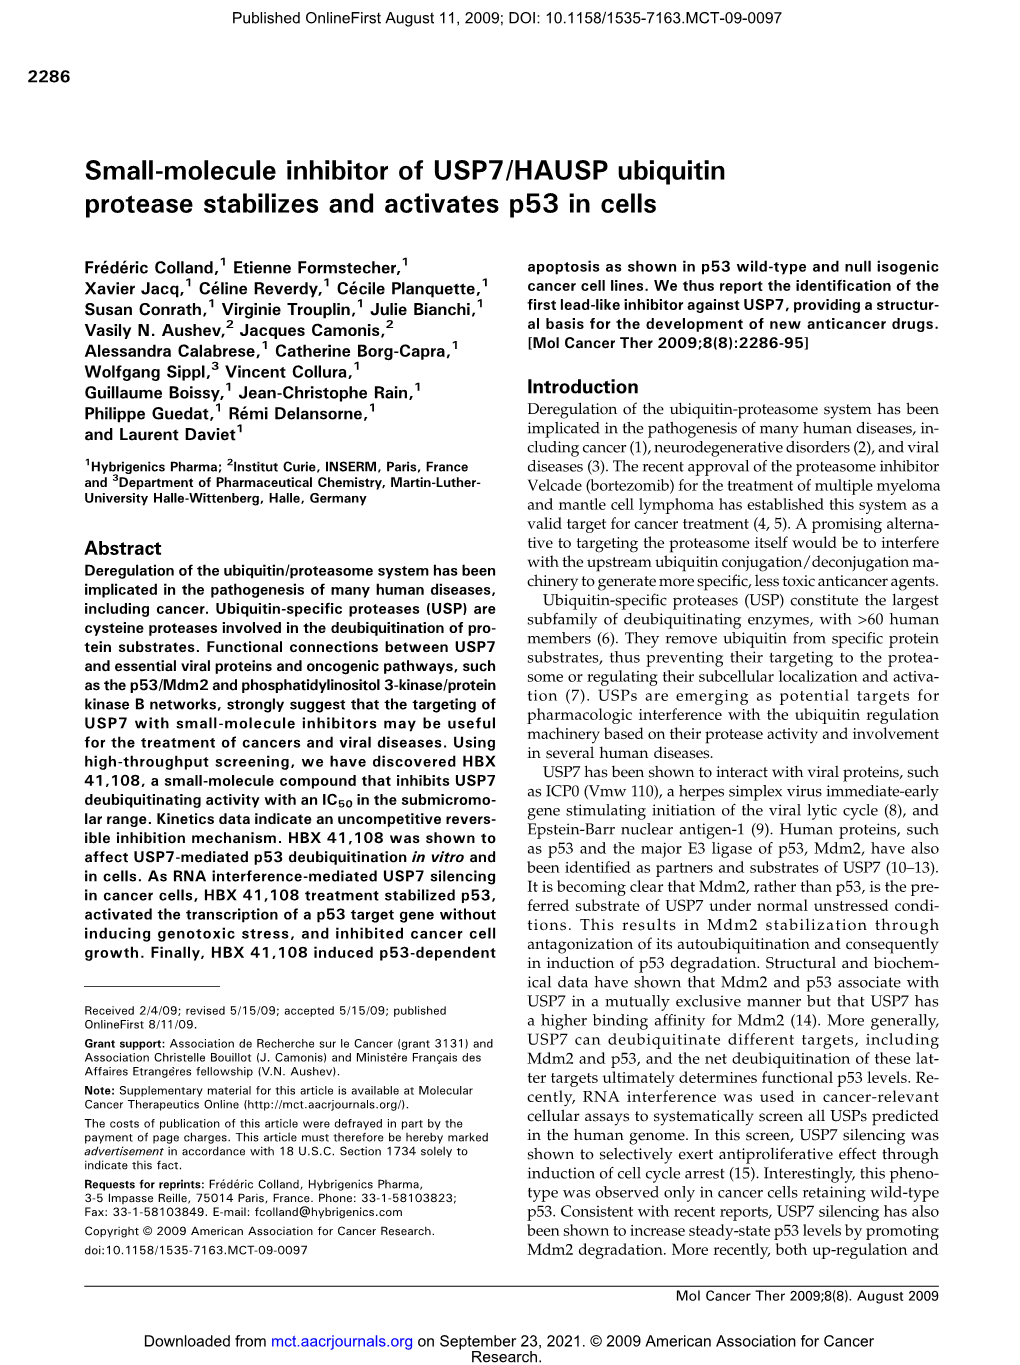 Small-Molecule Inhibitor of USP7/HAUSP Ubiquitin Protease Stabilizes and Activates P53 in Cells